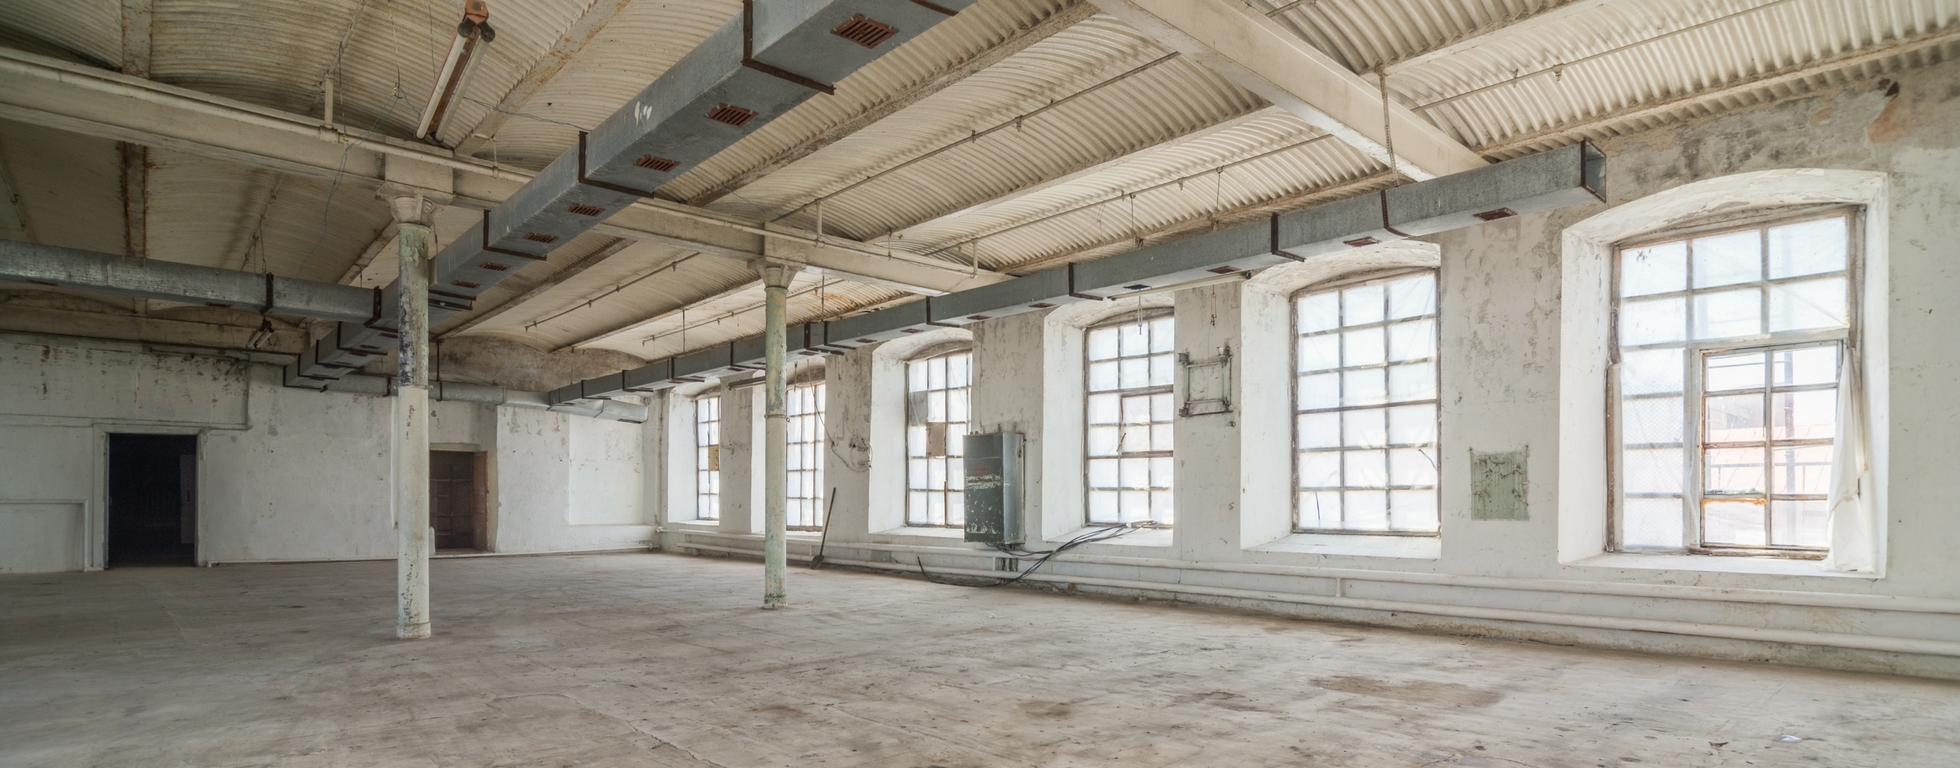 Unoccupied Commercial Property Insurance